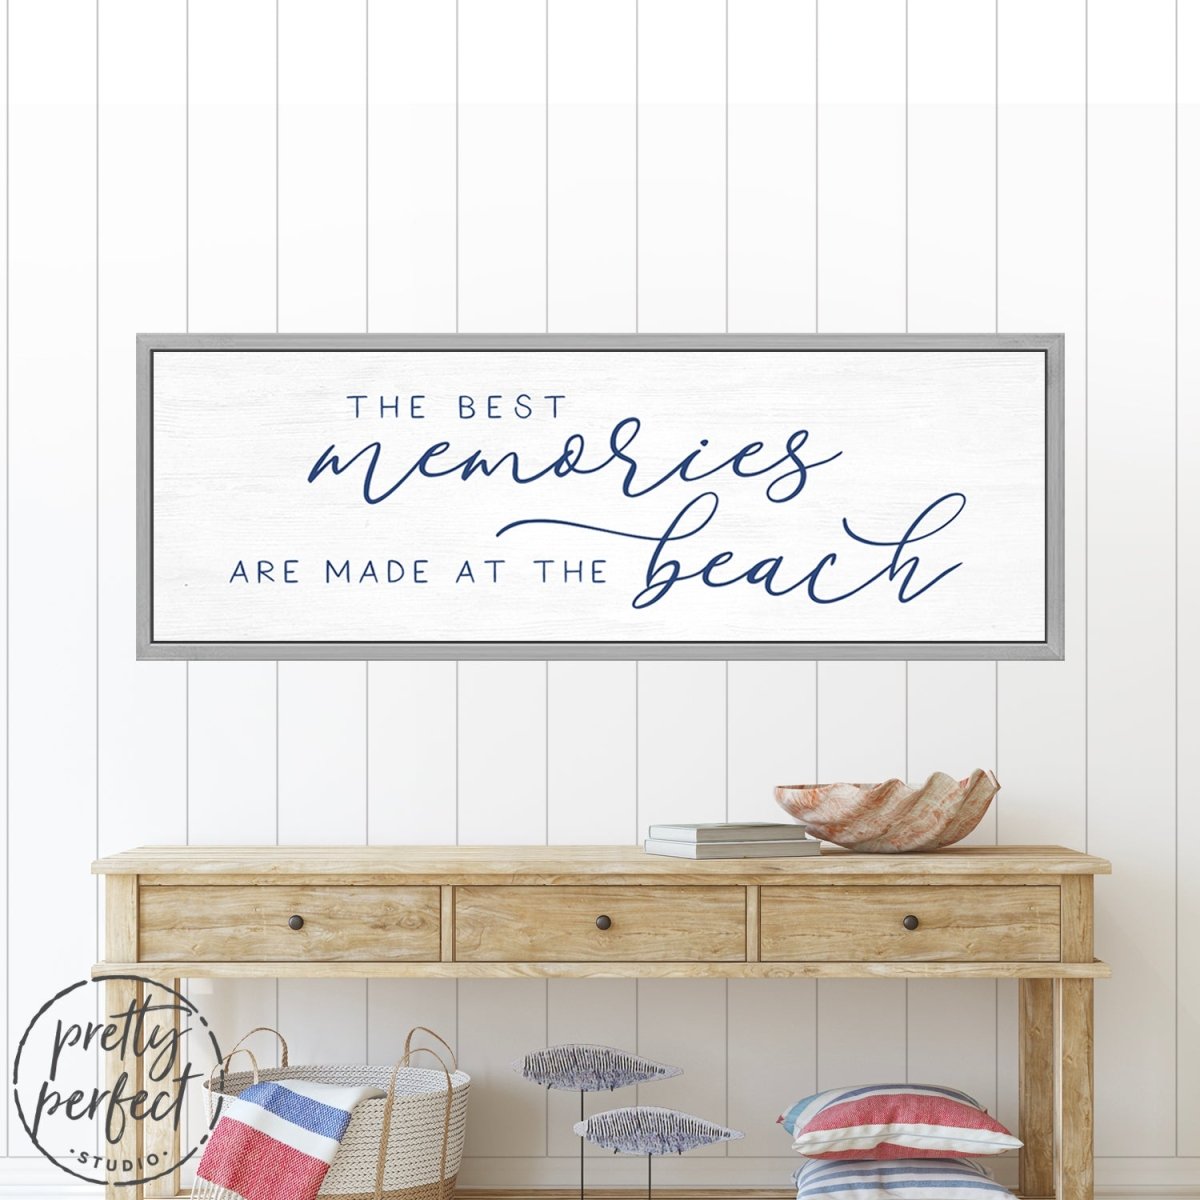 The Best Memories Are Made At The Beach Sign on Wall Above Entryway Table - Pretty Perfect Studio